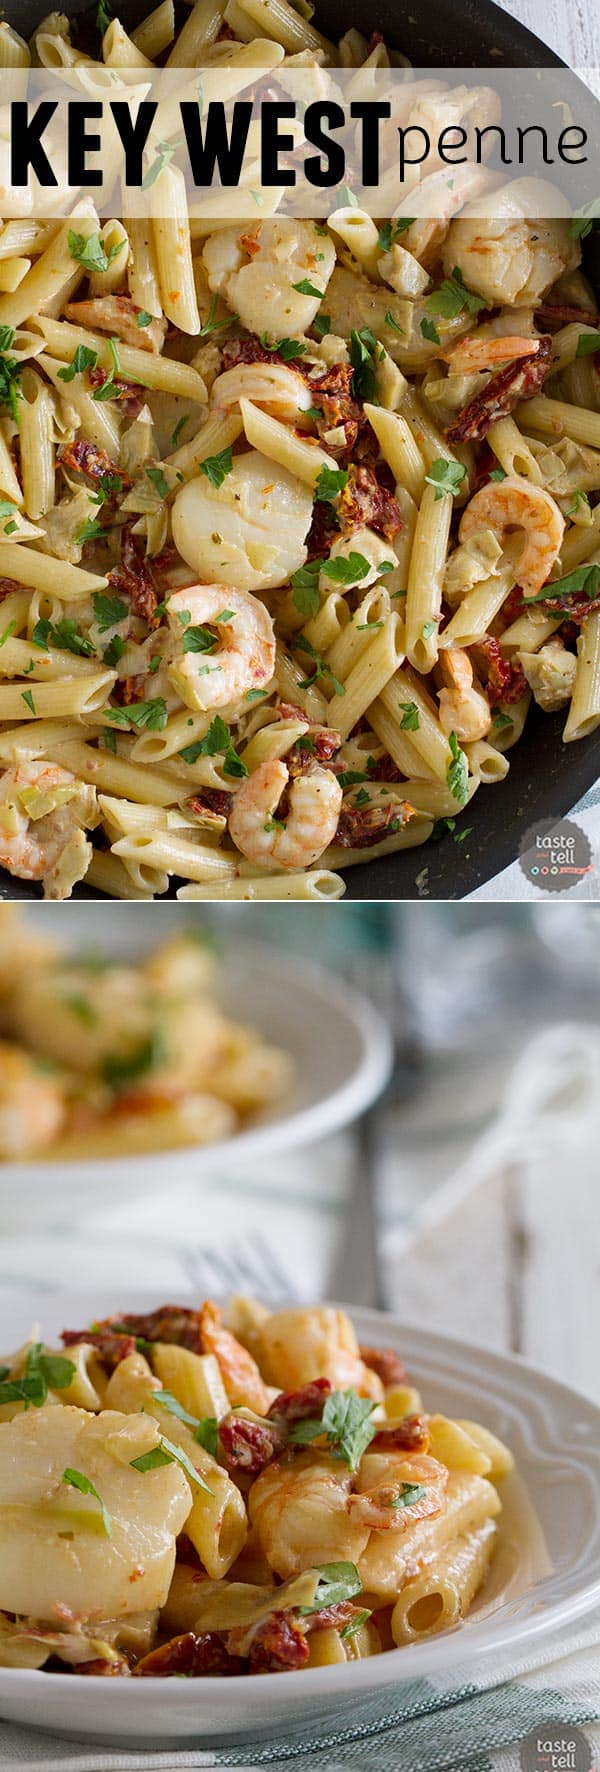 Key West Penne - Taste and Tell